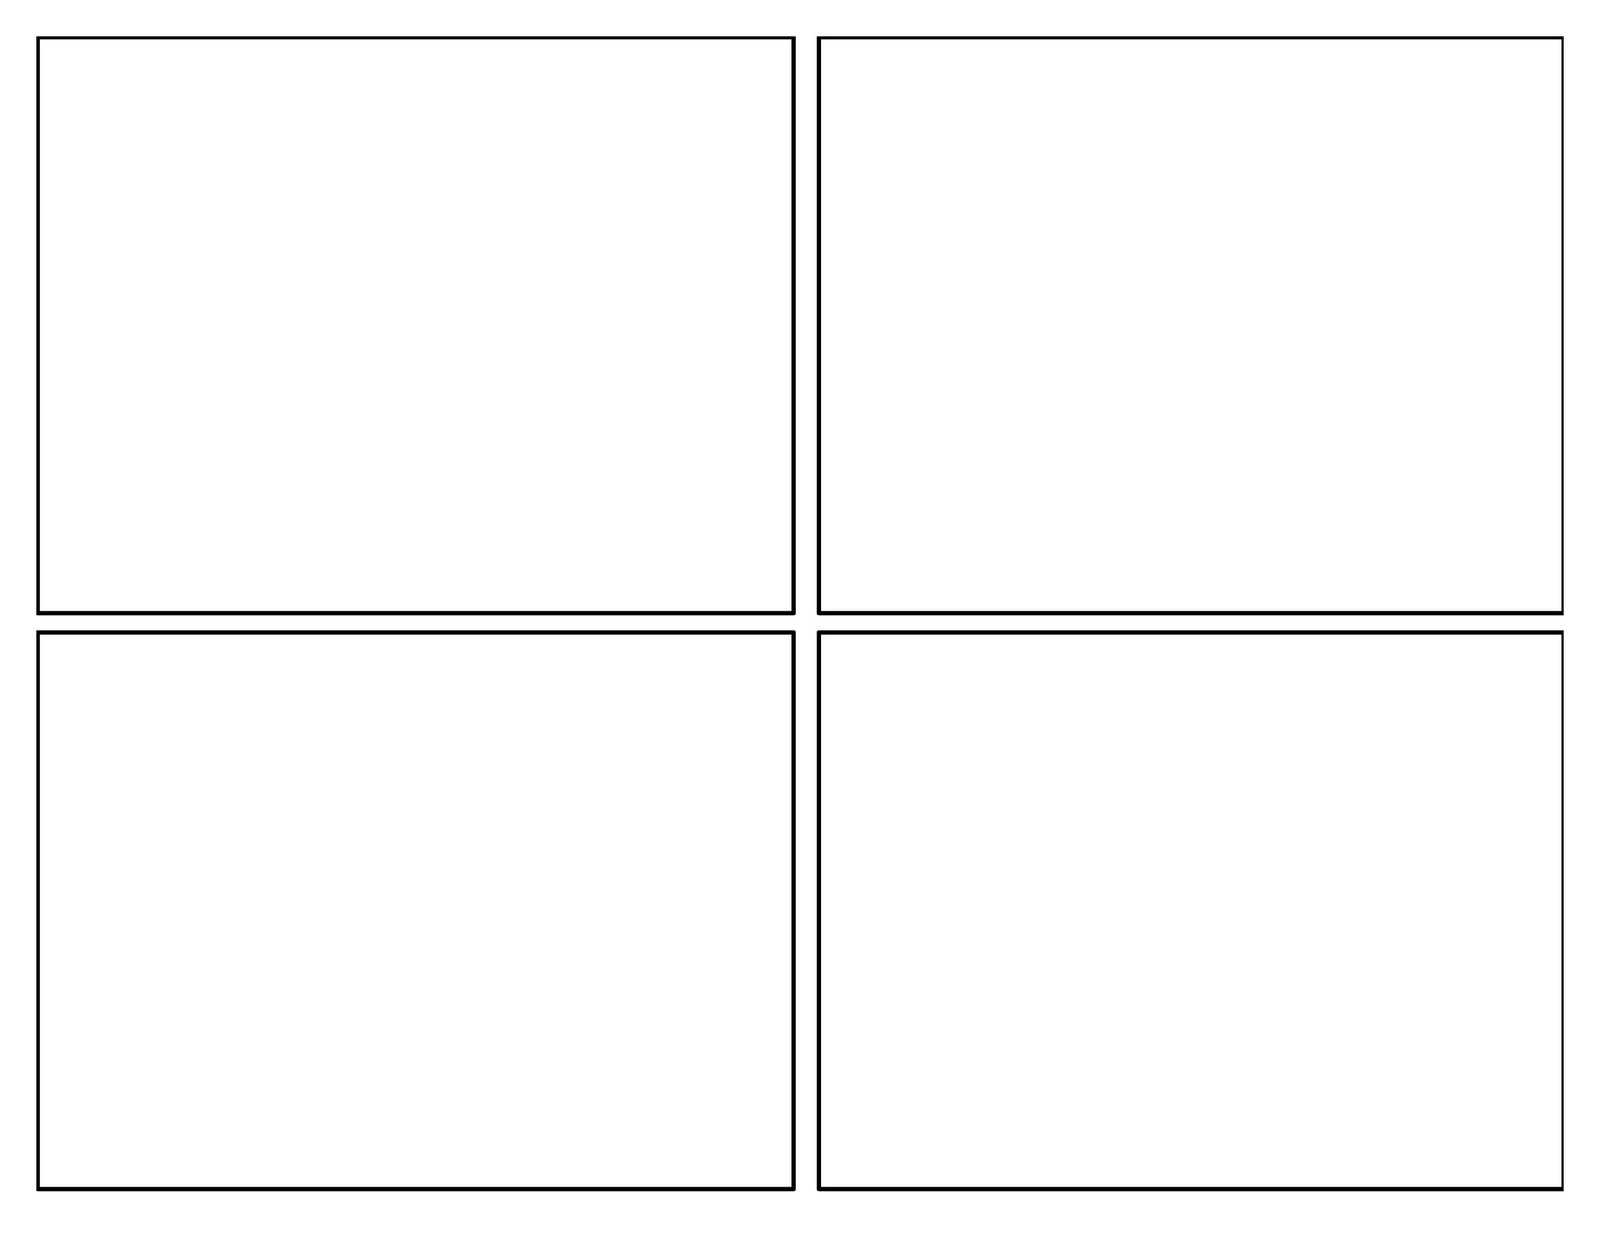 Blank 4 Square Template